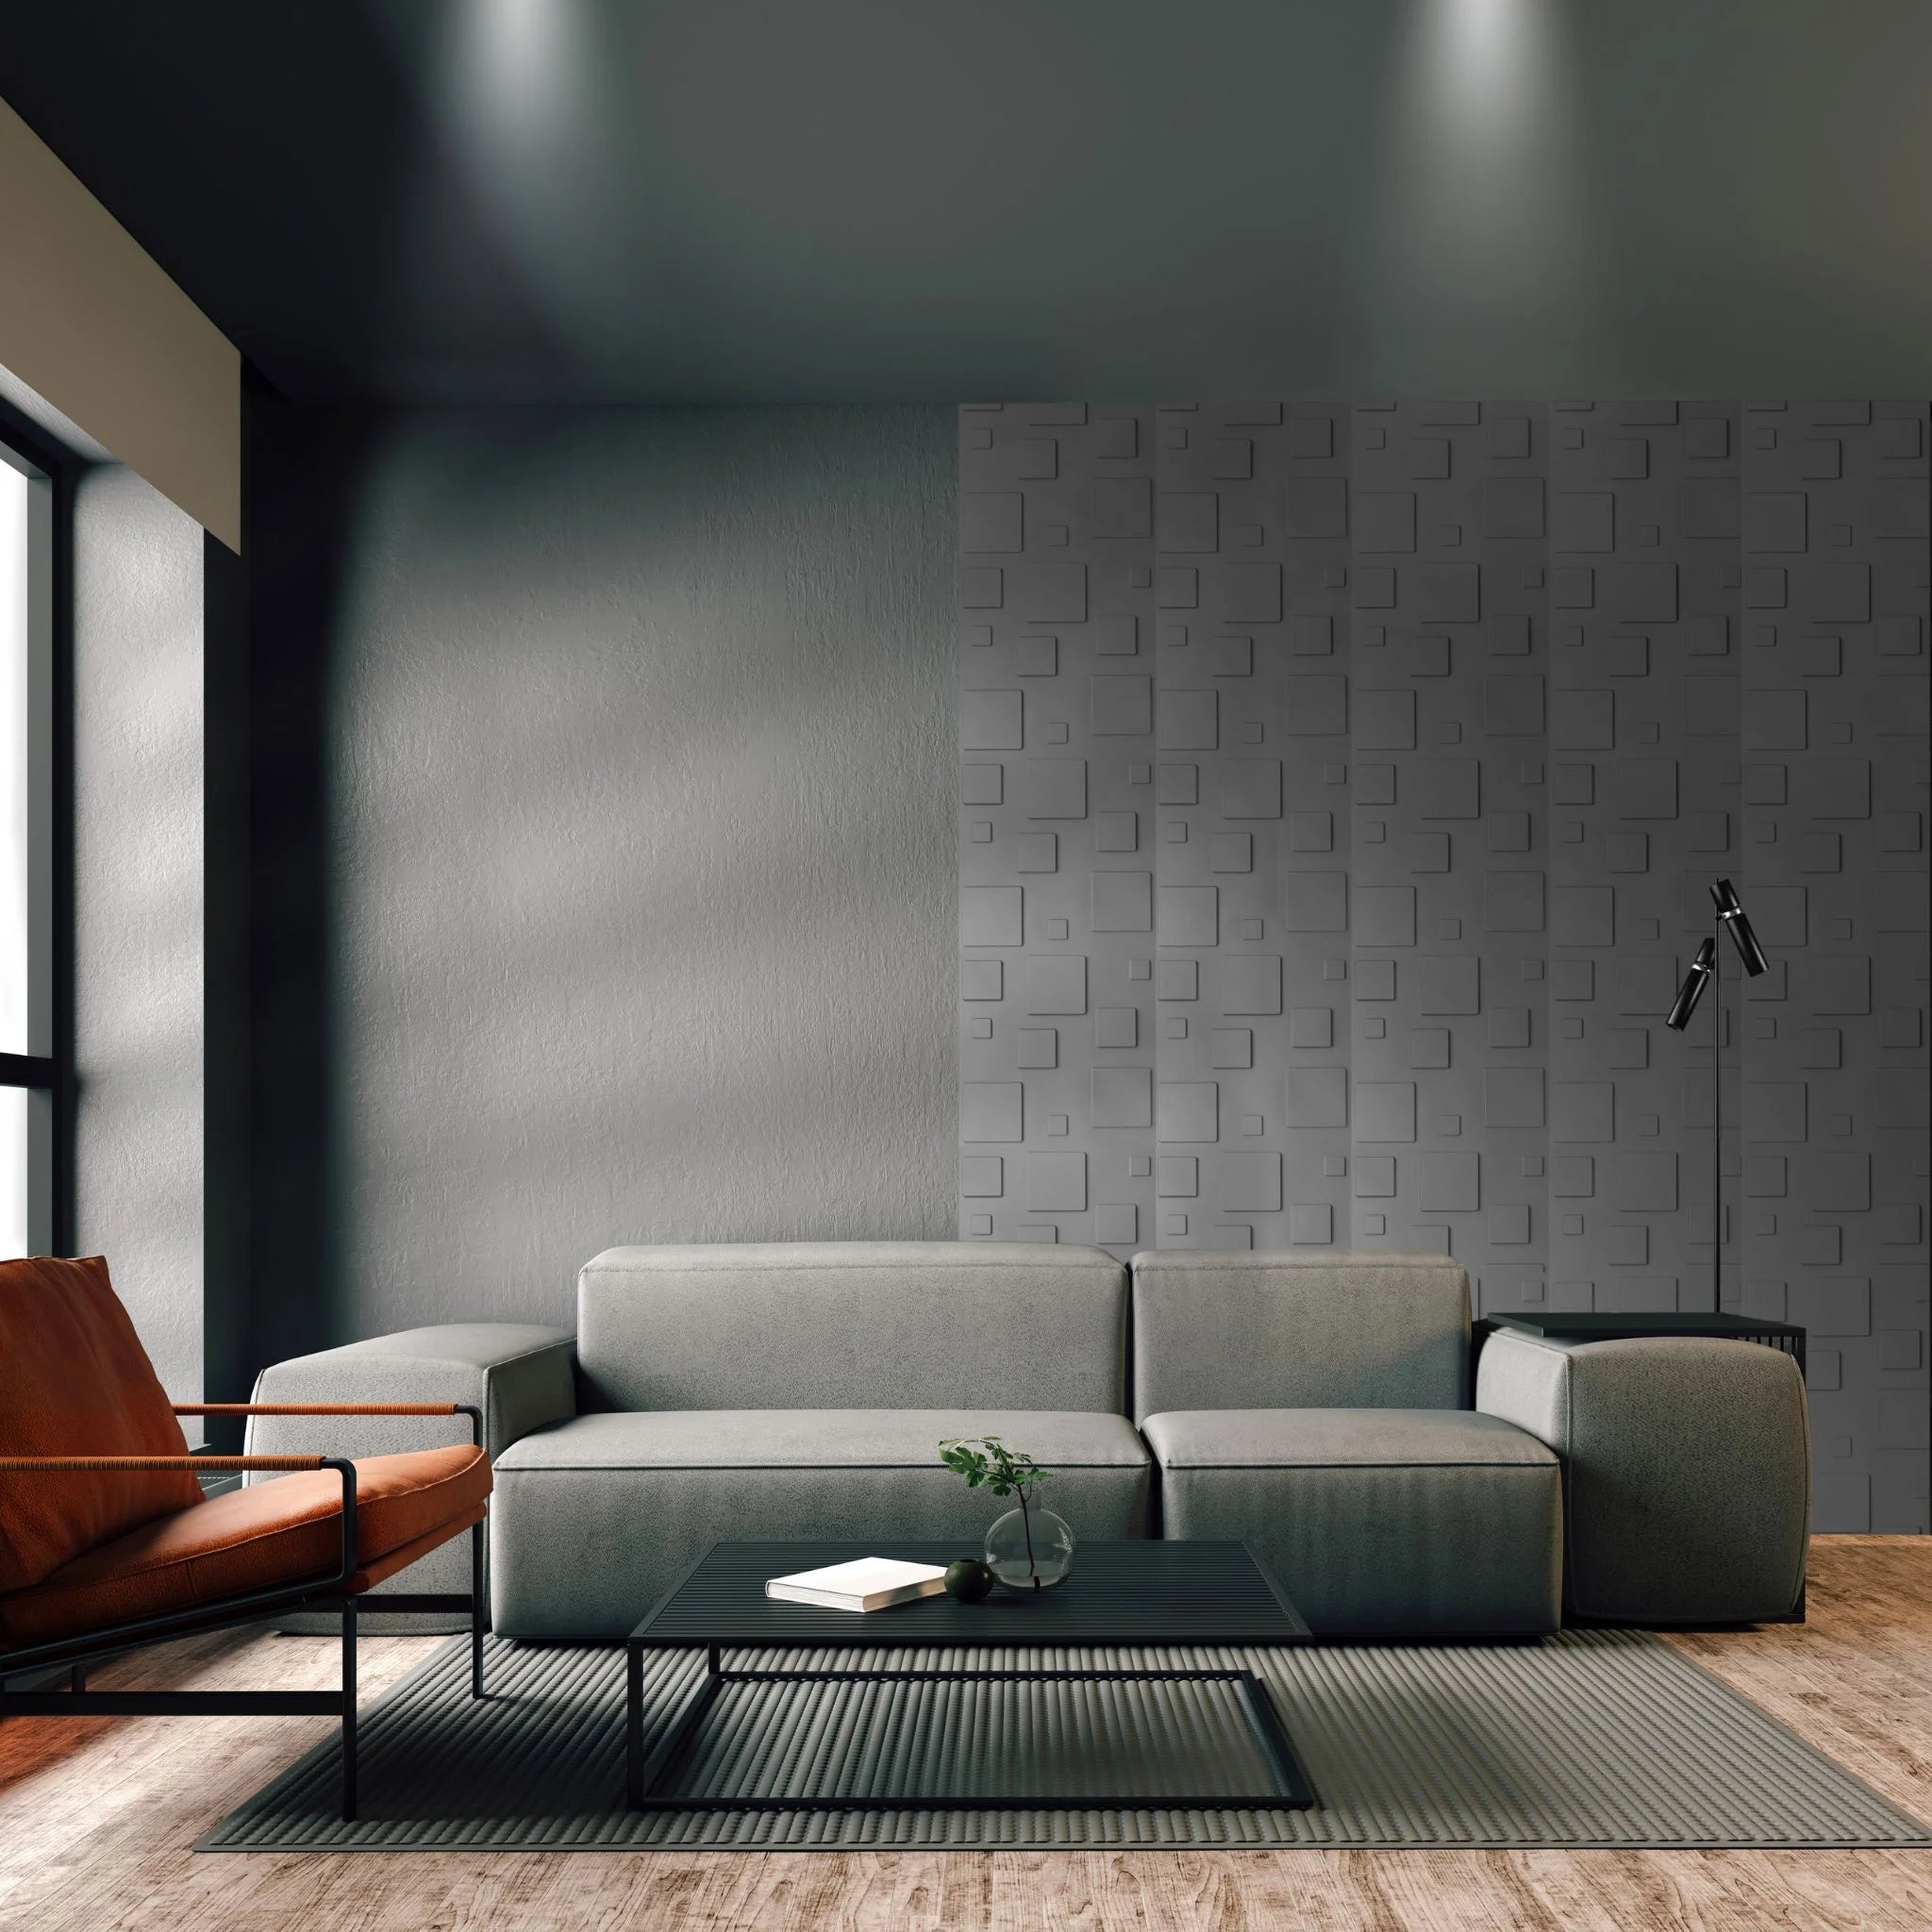 Modern living room with silver PVC wall panel featuring square patterns